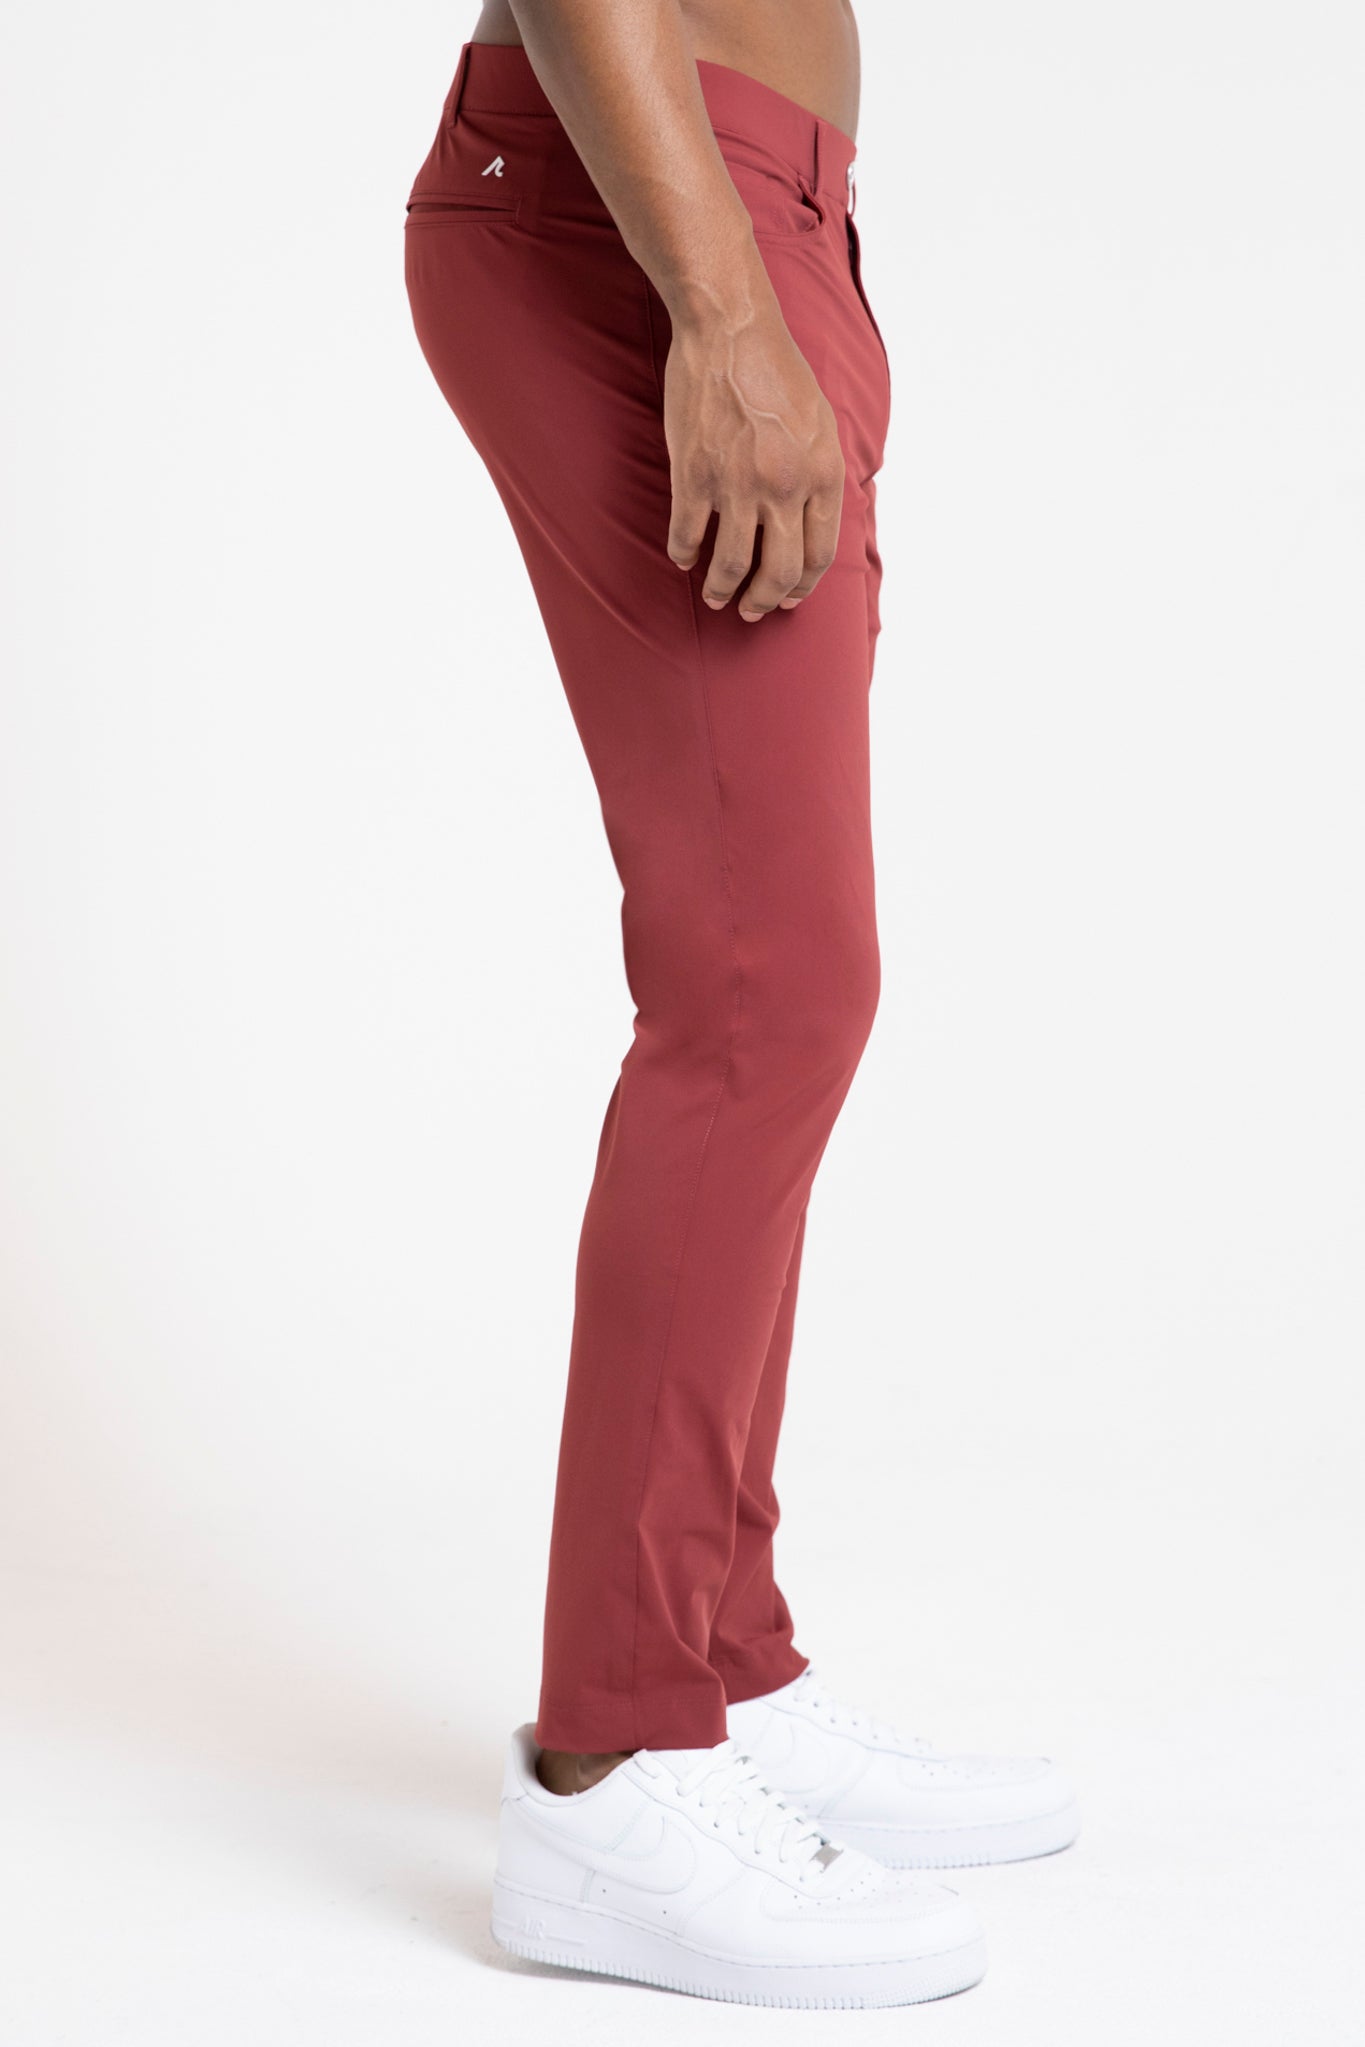 Image of the kent pull-on trouser in maroon